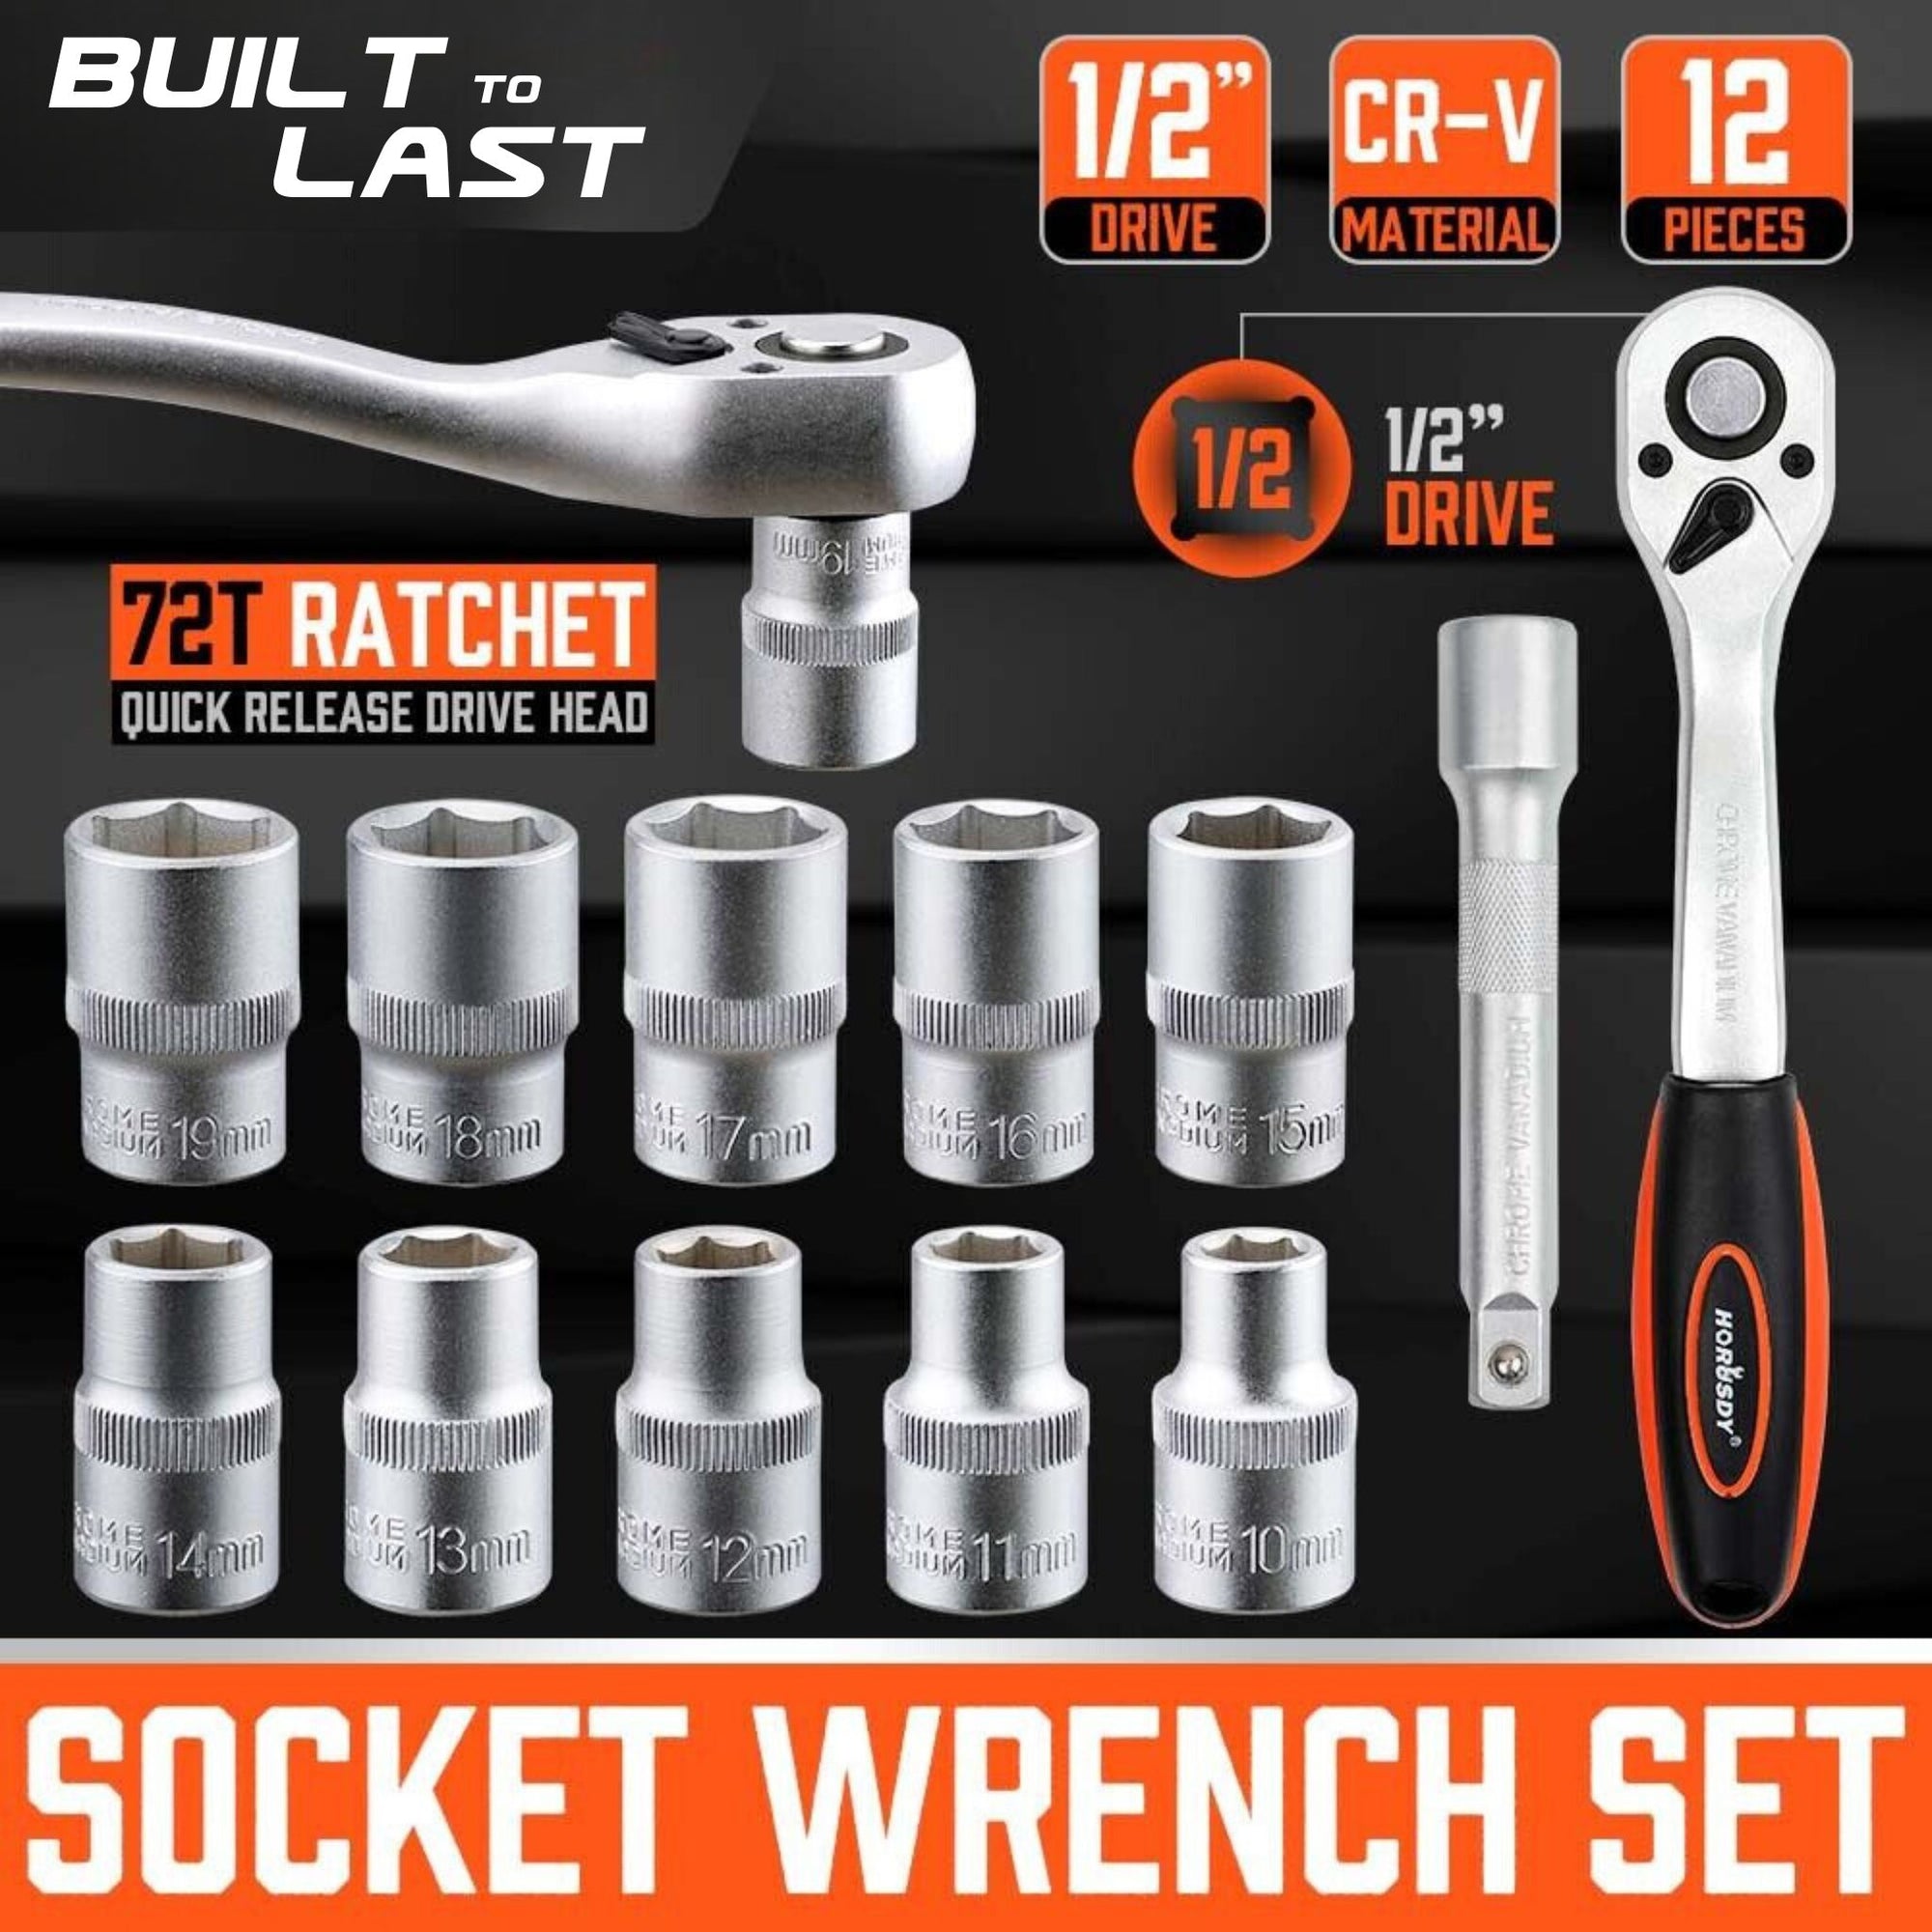 1/2" Ratchet Socket Wrench Set Extension Bar | 12 pieces - South East Clearance Centre